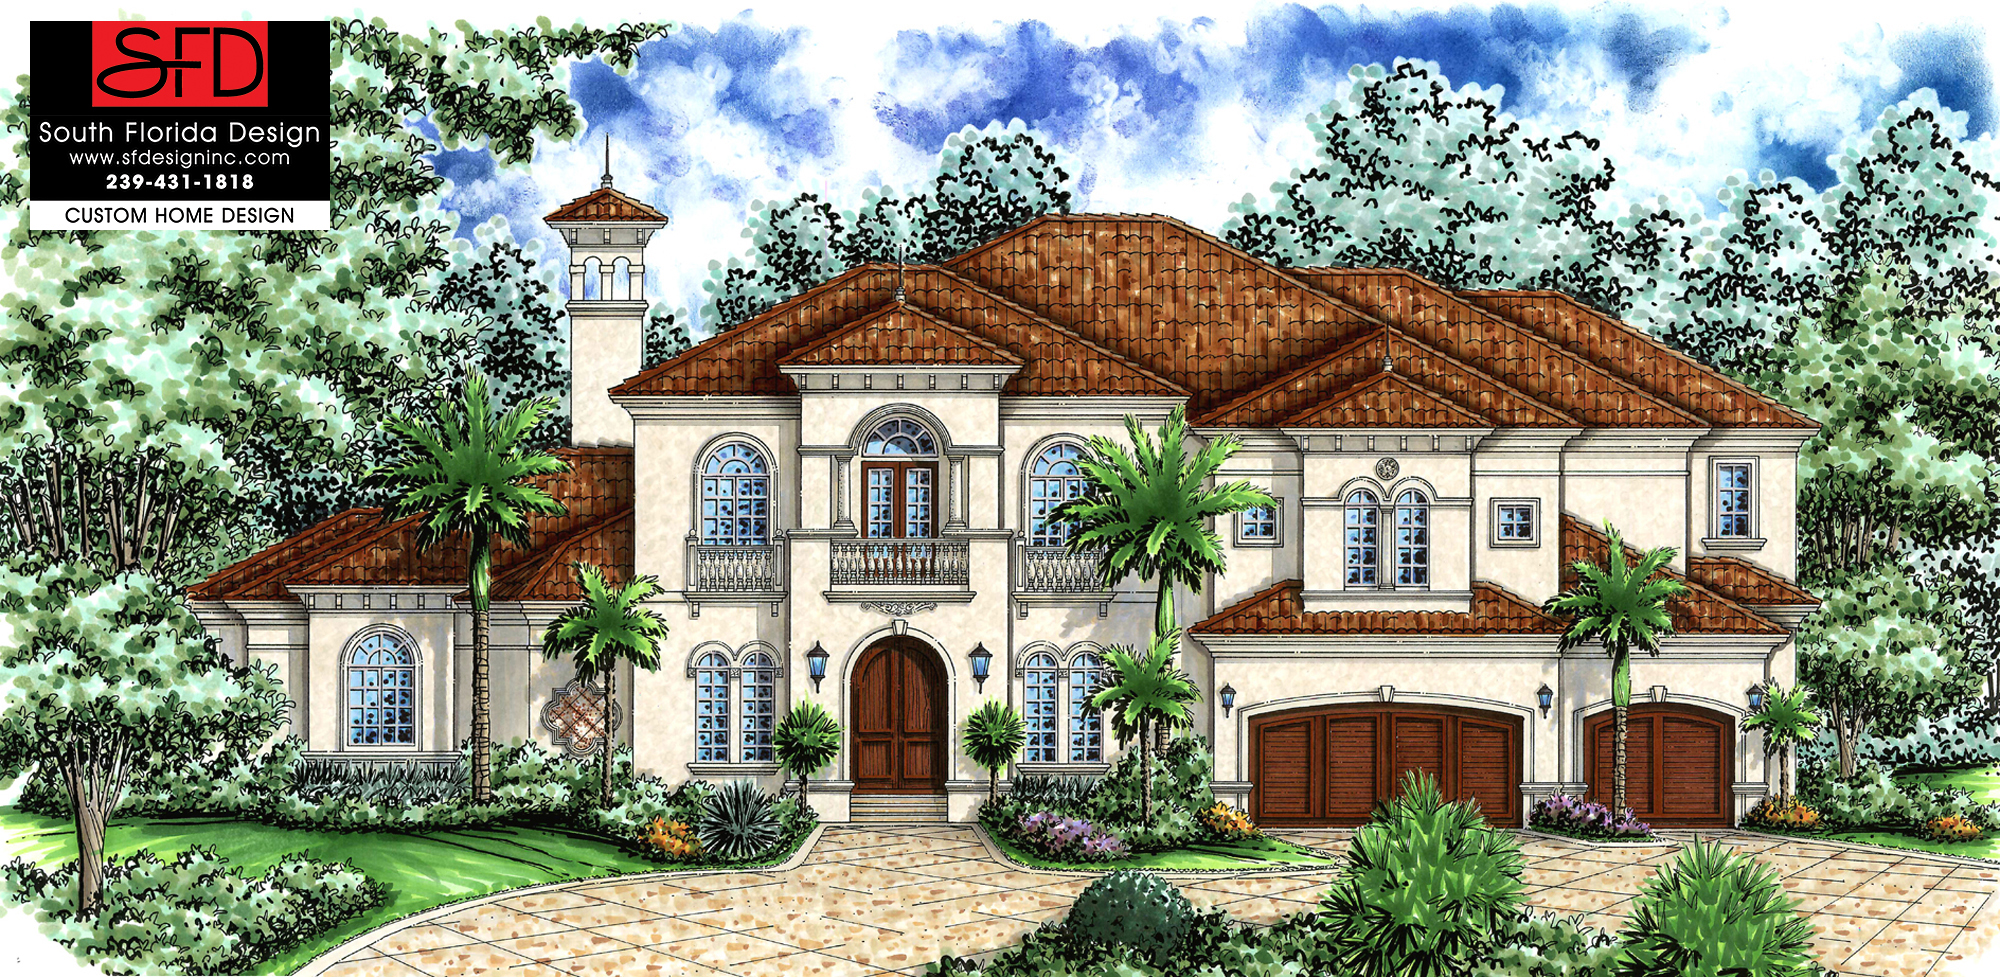 Color front elevation rendering of a 2-story 5,333sf luxury European house plan